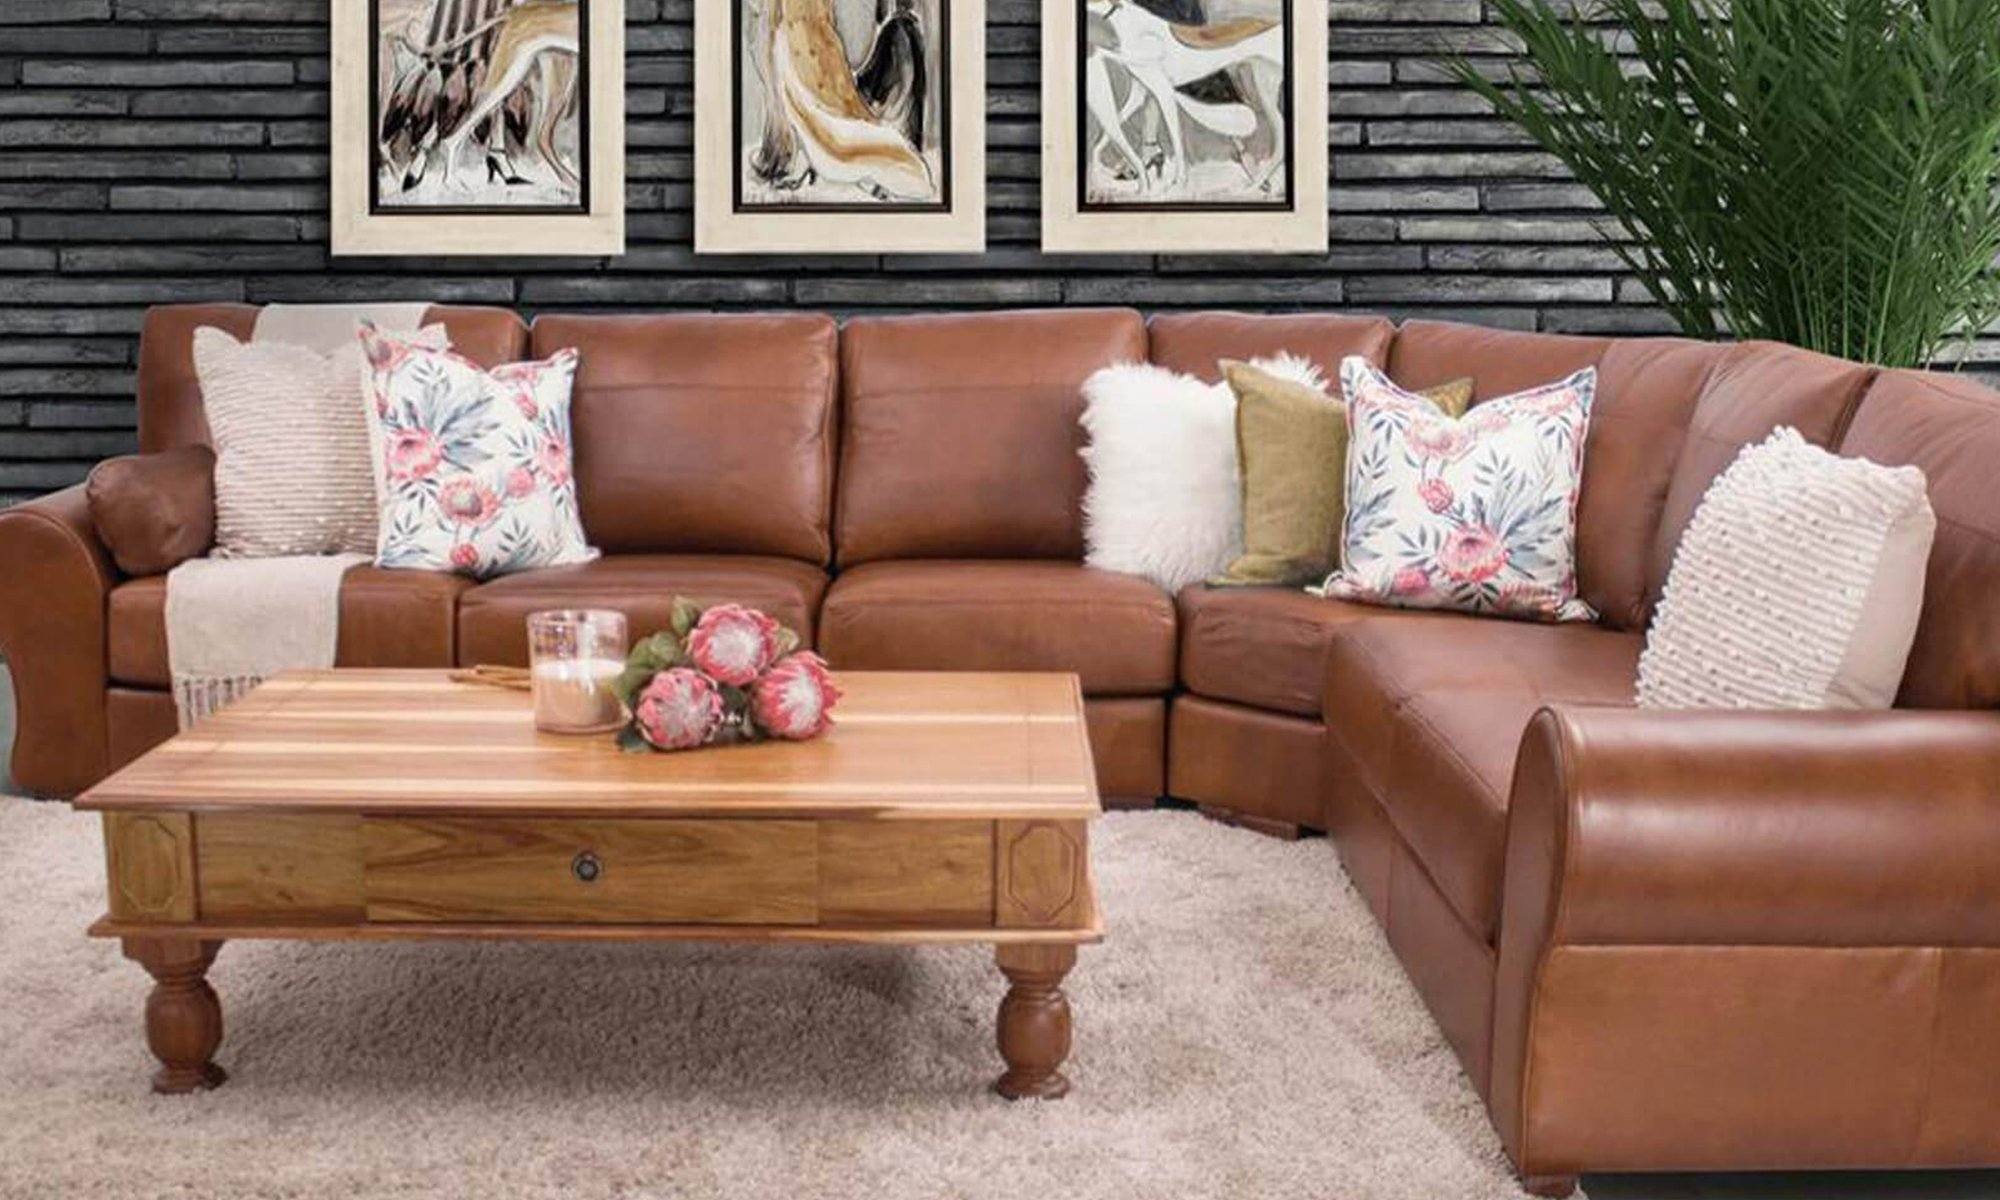 Why you should buy brown or shades of brown genuine leather furniture